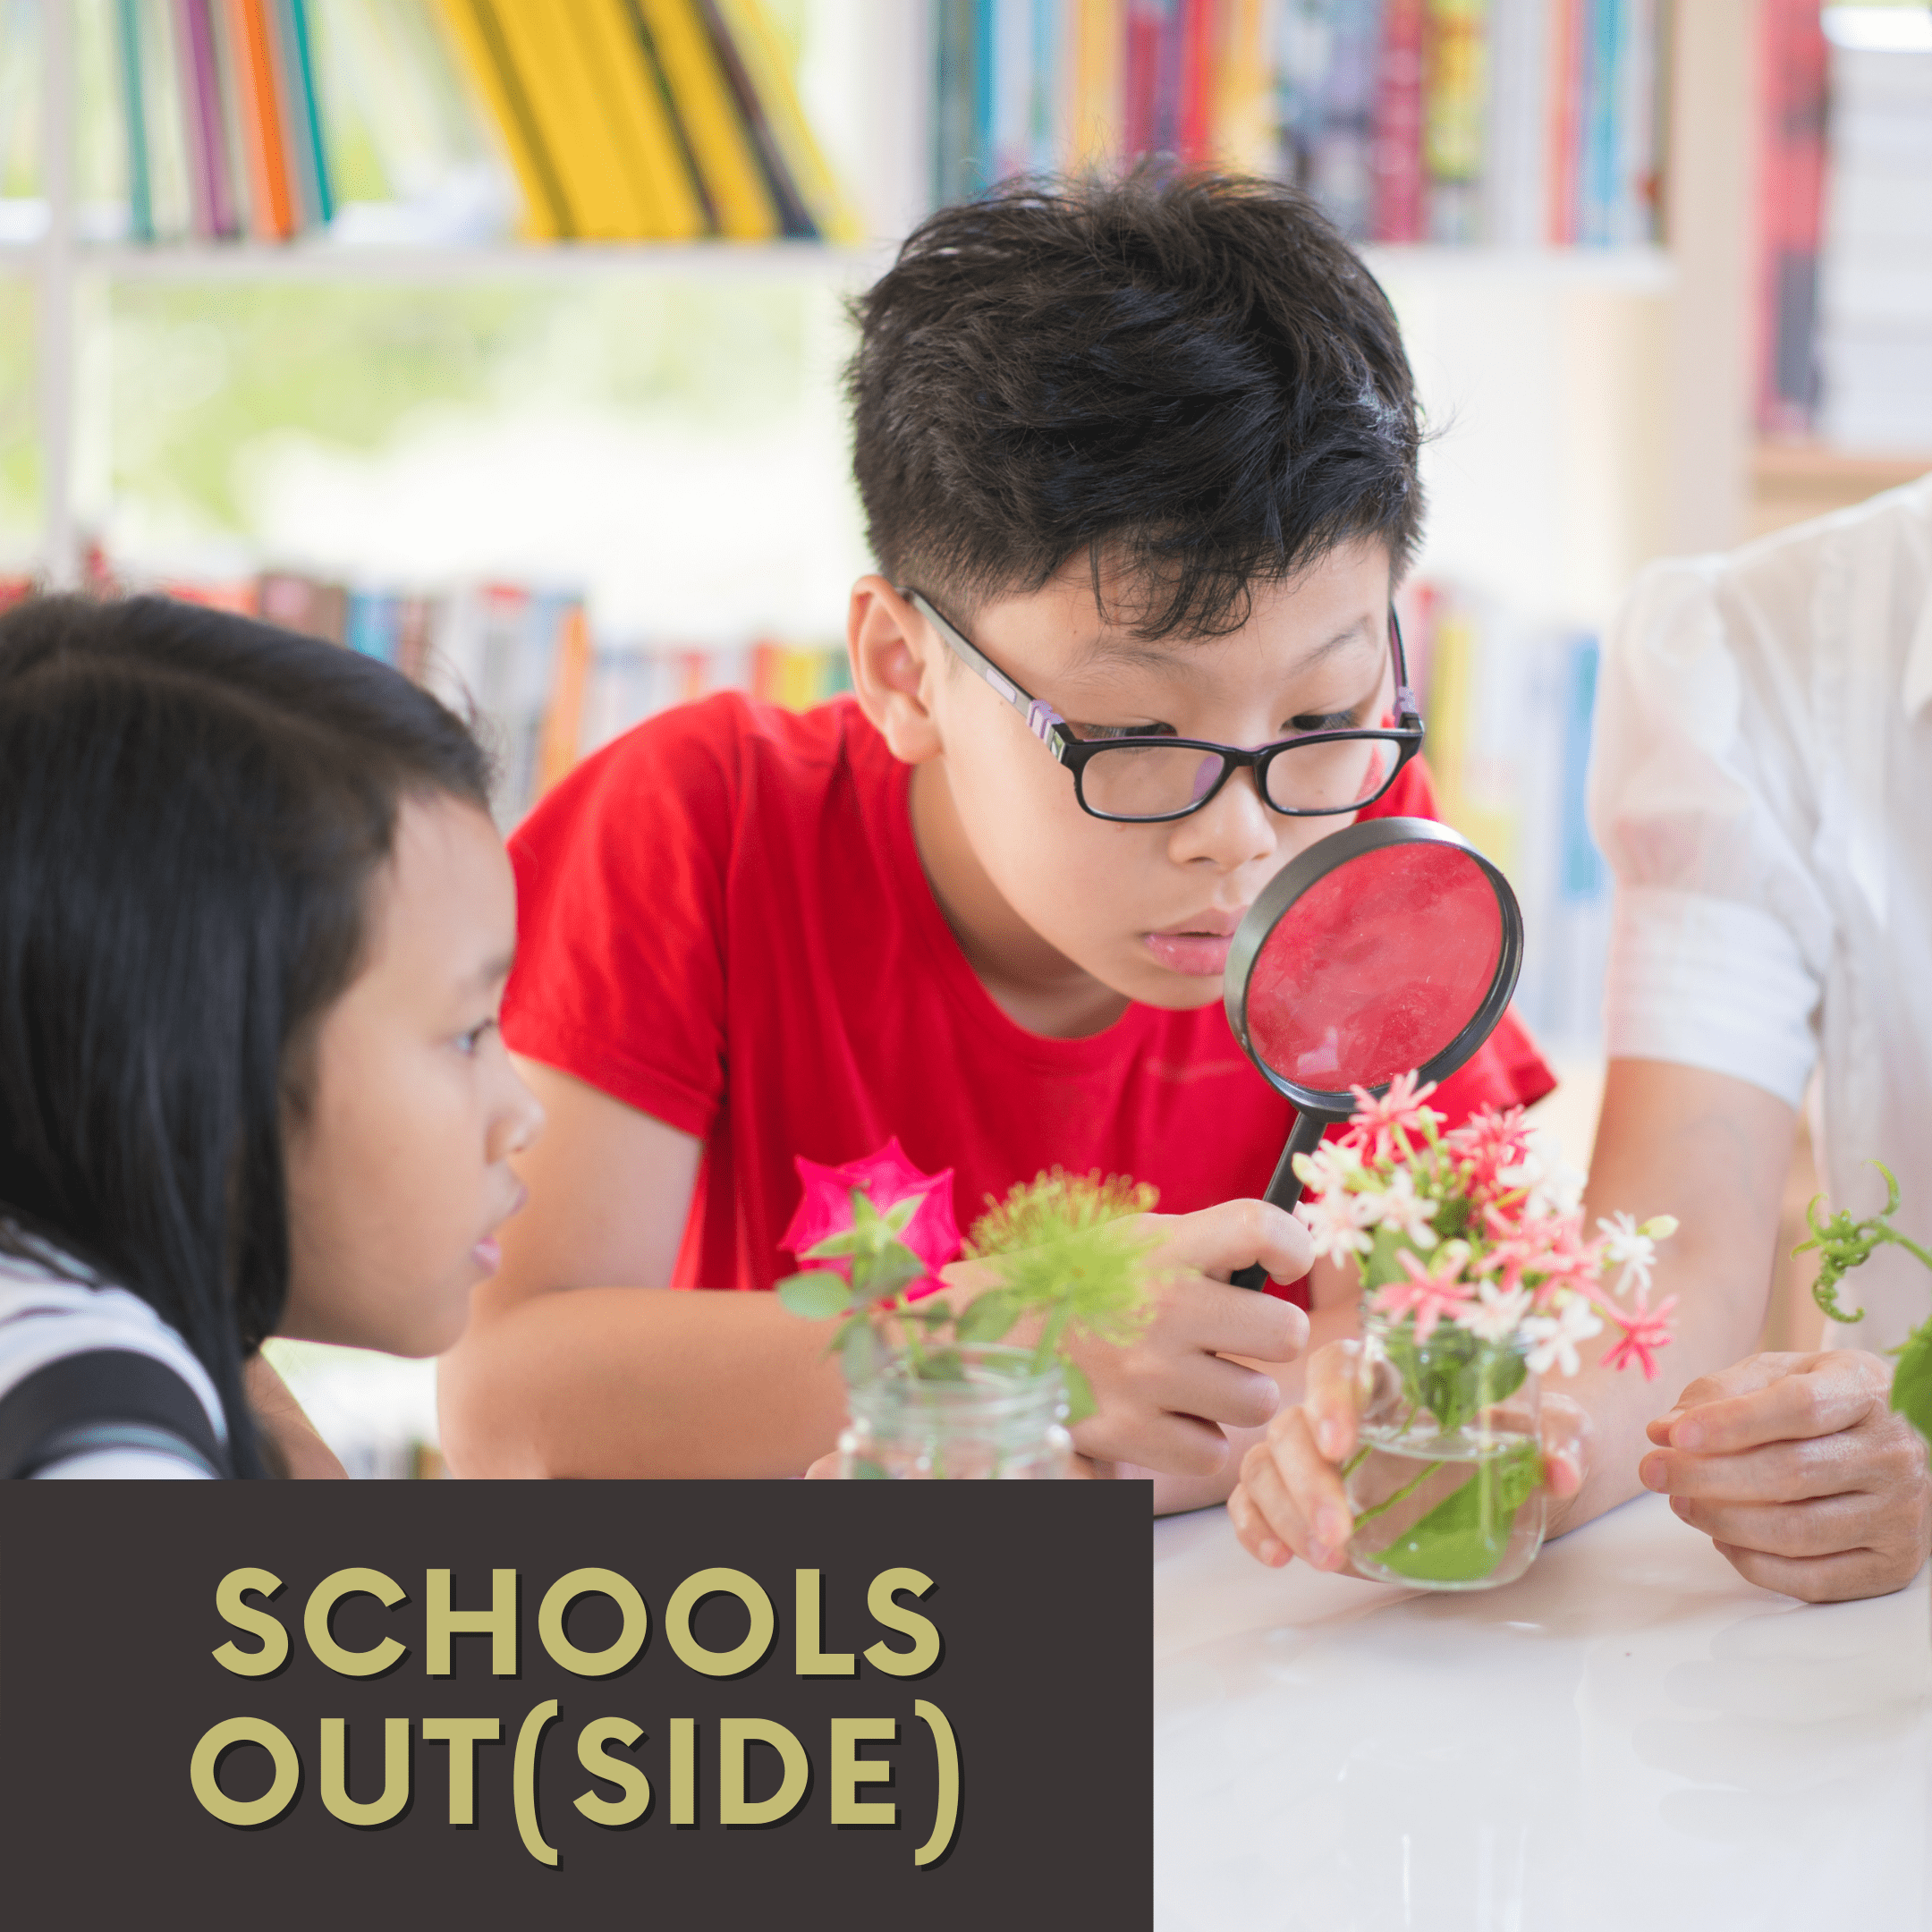 Cancelled: Schools Out(side) - Community Science & Plant Phenology